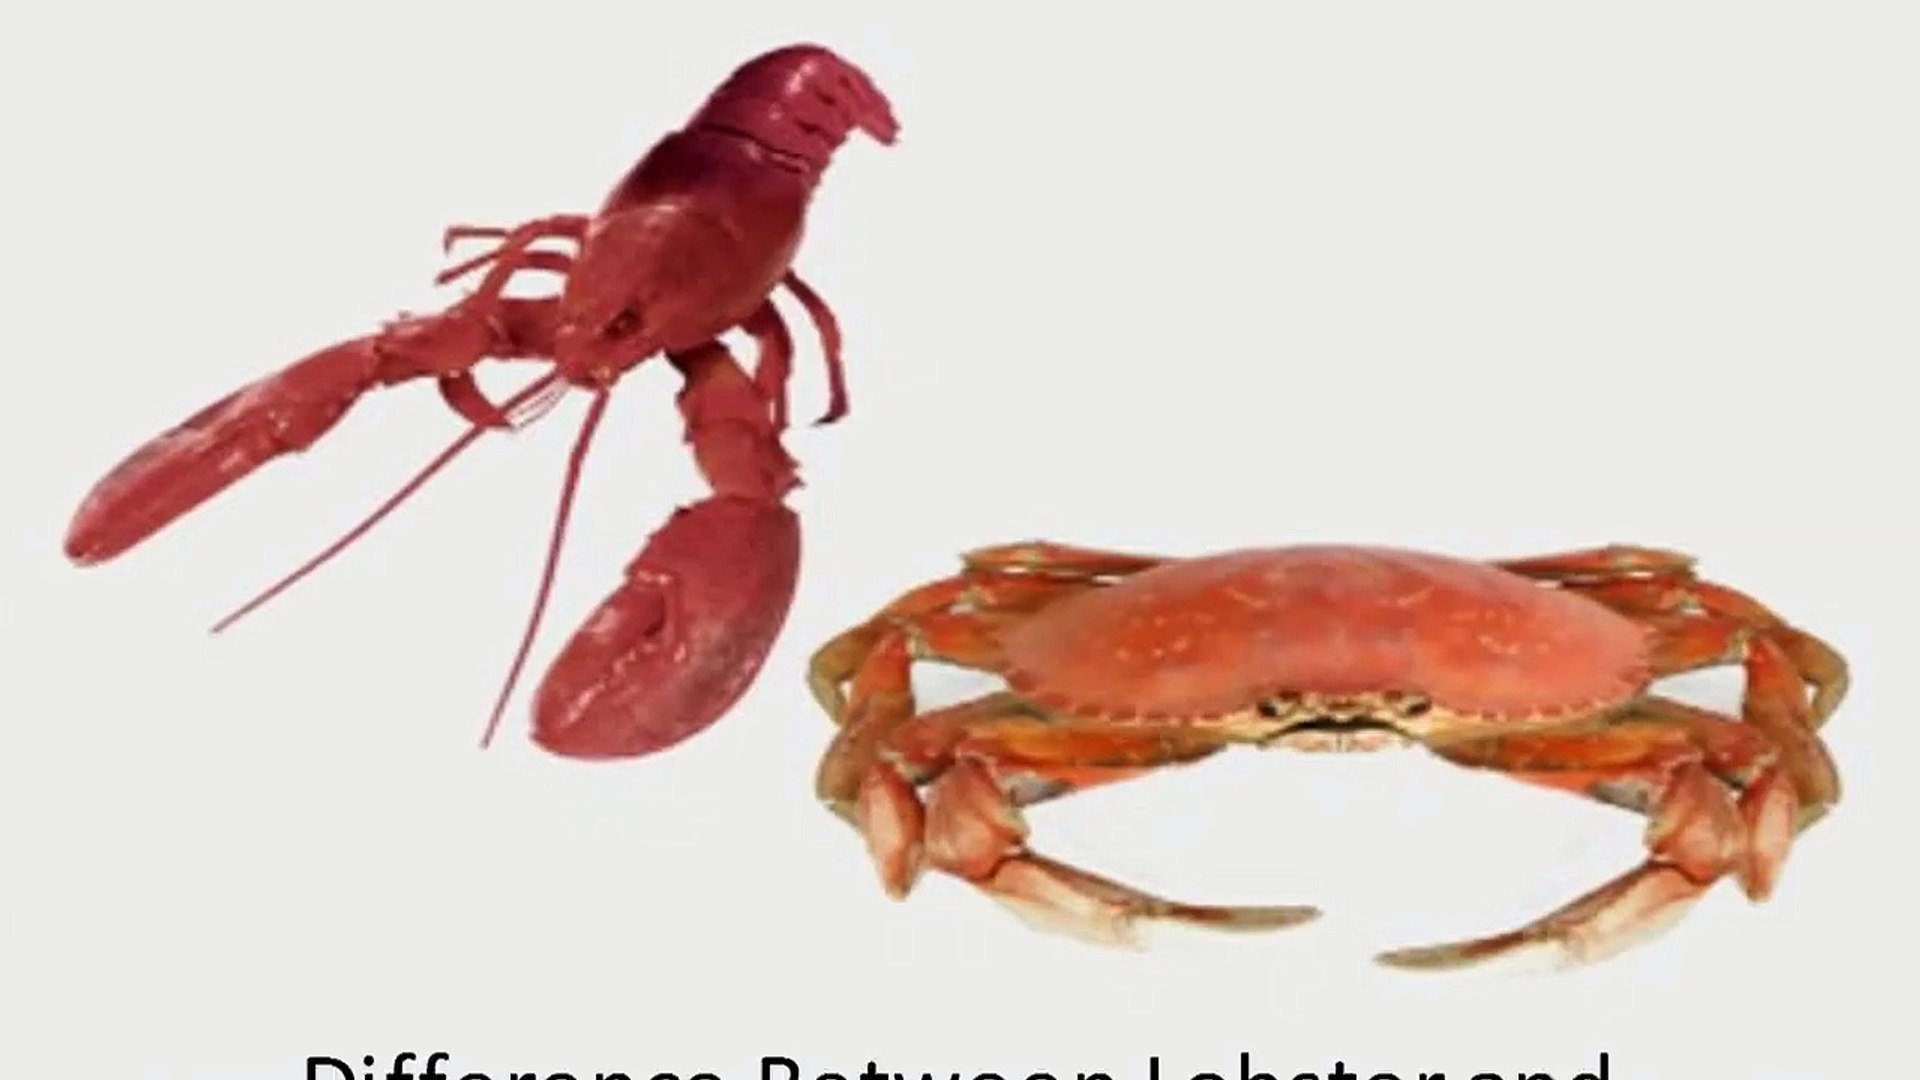 What is the difference between a lobster and a crab?